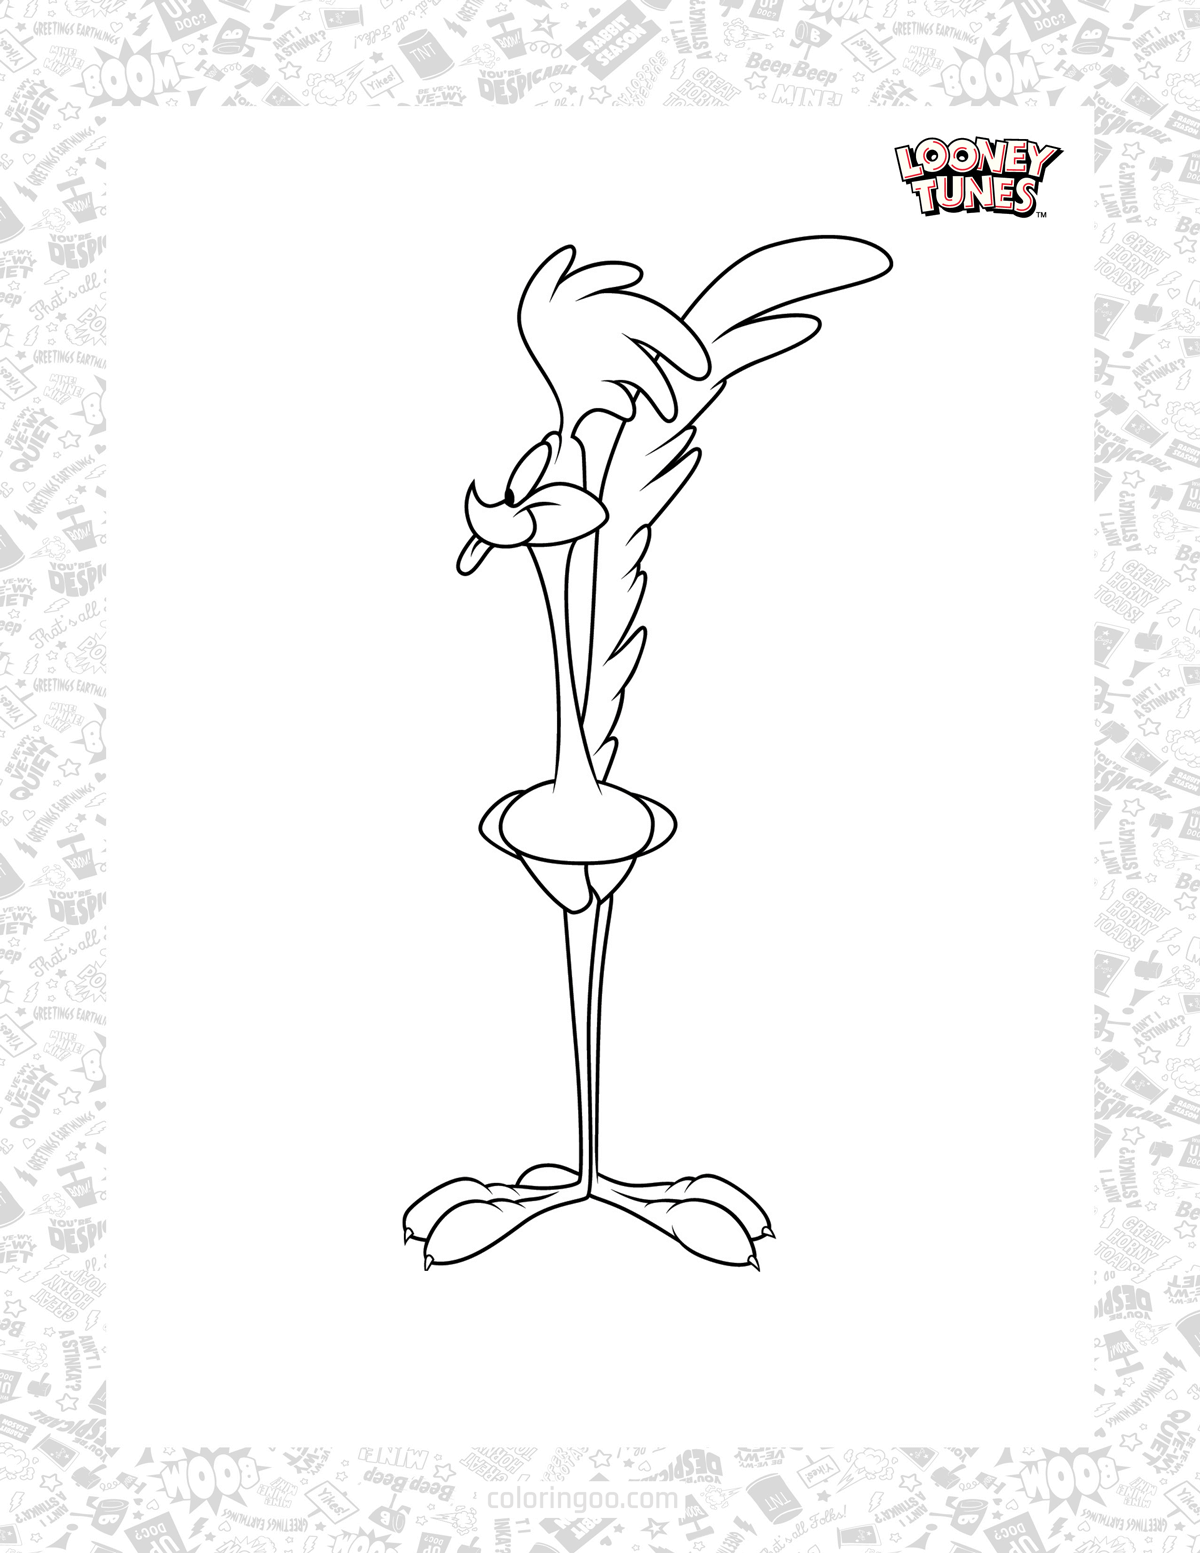 the road runner coloring sheet